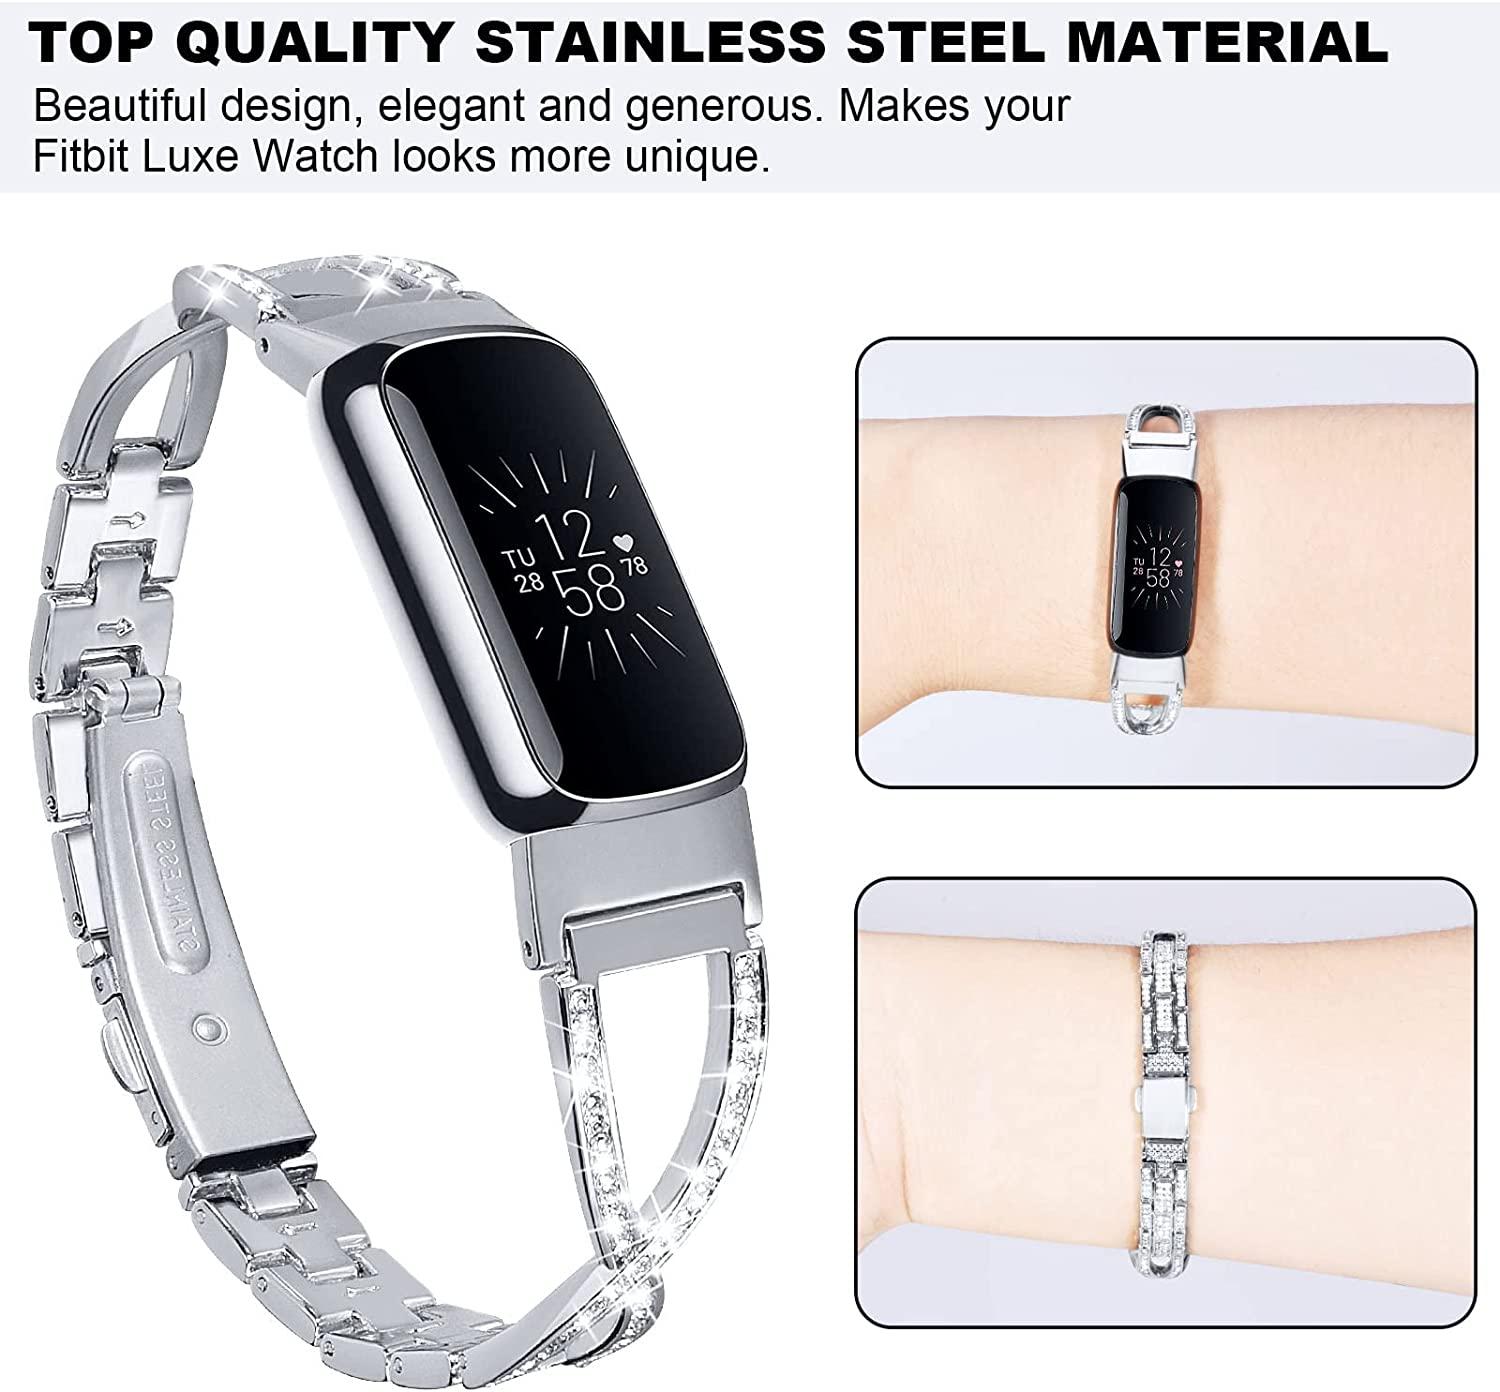 Bling Diamond Bracelet Stainless Steel Band Watch Strap For Fitbit luxe/luxe